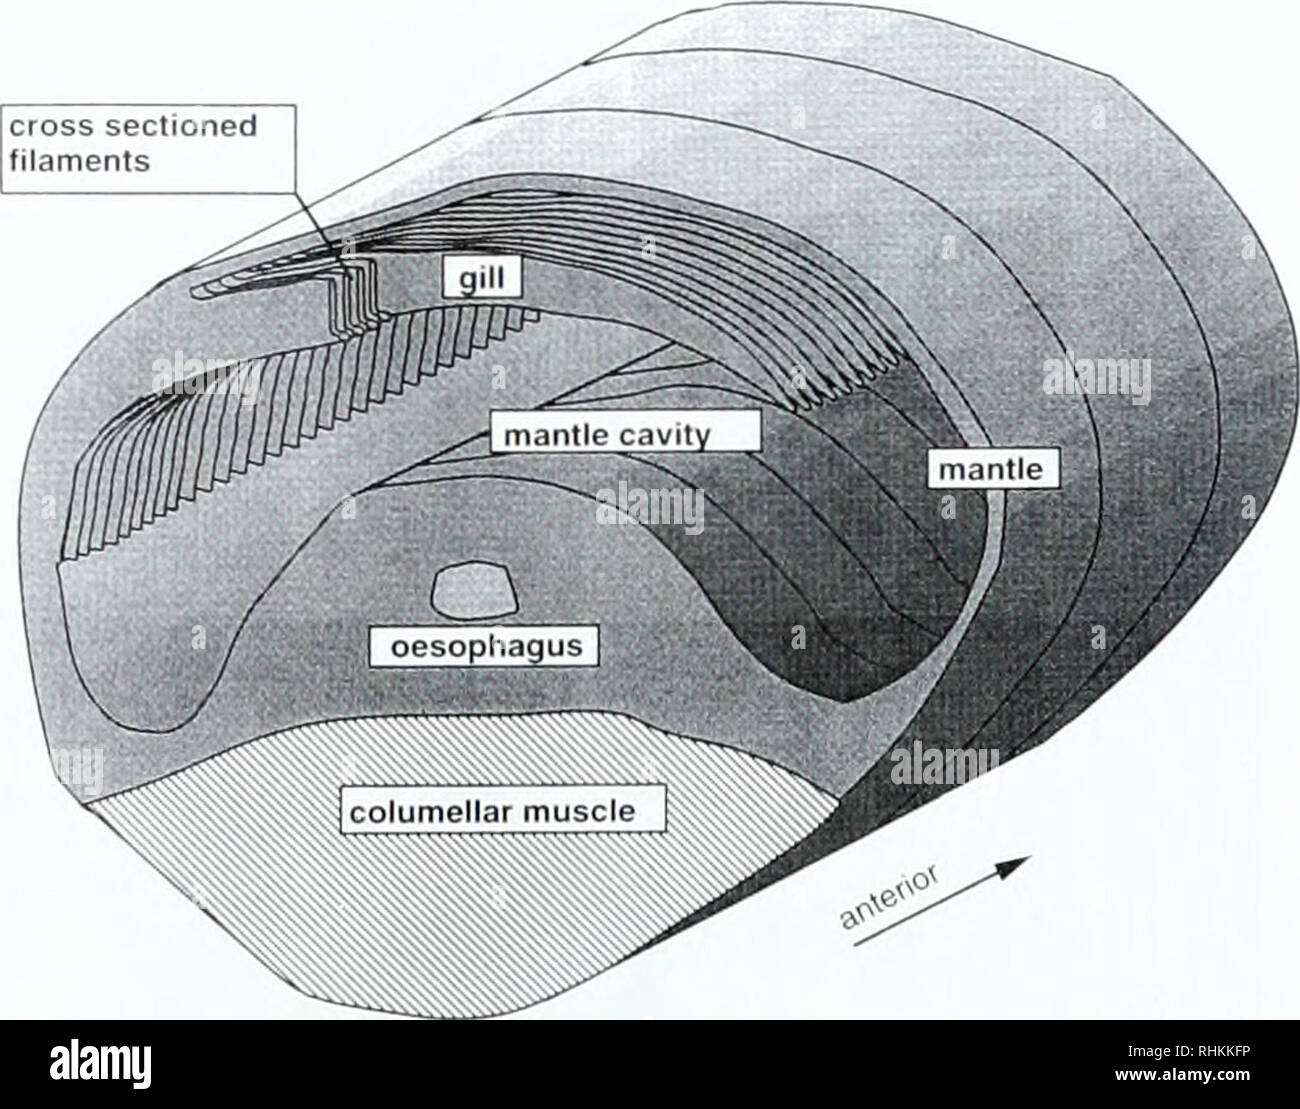 . The Biological bulletin. Biology; Zoology; Biology; Marine Biology. cm Figure 1. Ifremeria nautilei. Anatomy of the mantle cavity and the ctenidium to show the dimension and location of the ctenidium. The shell has been removed, the mantle cavity partly opened, and in &quot;f&quot; the basal attached part of the filaments dissected from mantle, a, anus; cm. columellar muscle; f, gill filaments; f. gill filaments inside the mantle cavity; fo. foot: g. gill; hg. hypobranchial gland; mf, mantle fringe; op, operculum; os, osphradium; r, rectum; sn, snout. Scale 10 mm (after Beck, 1991. modified) Stock Photo